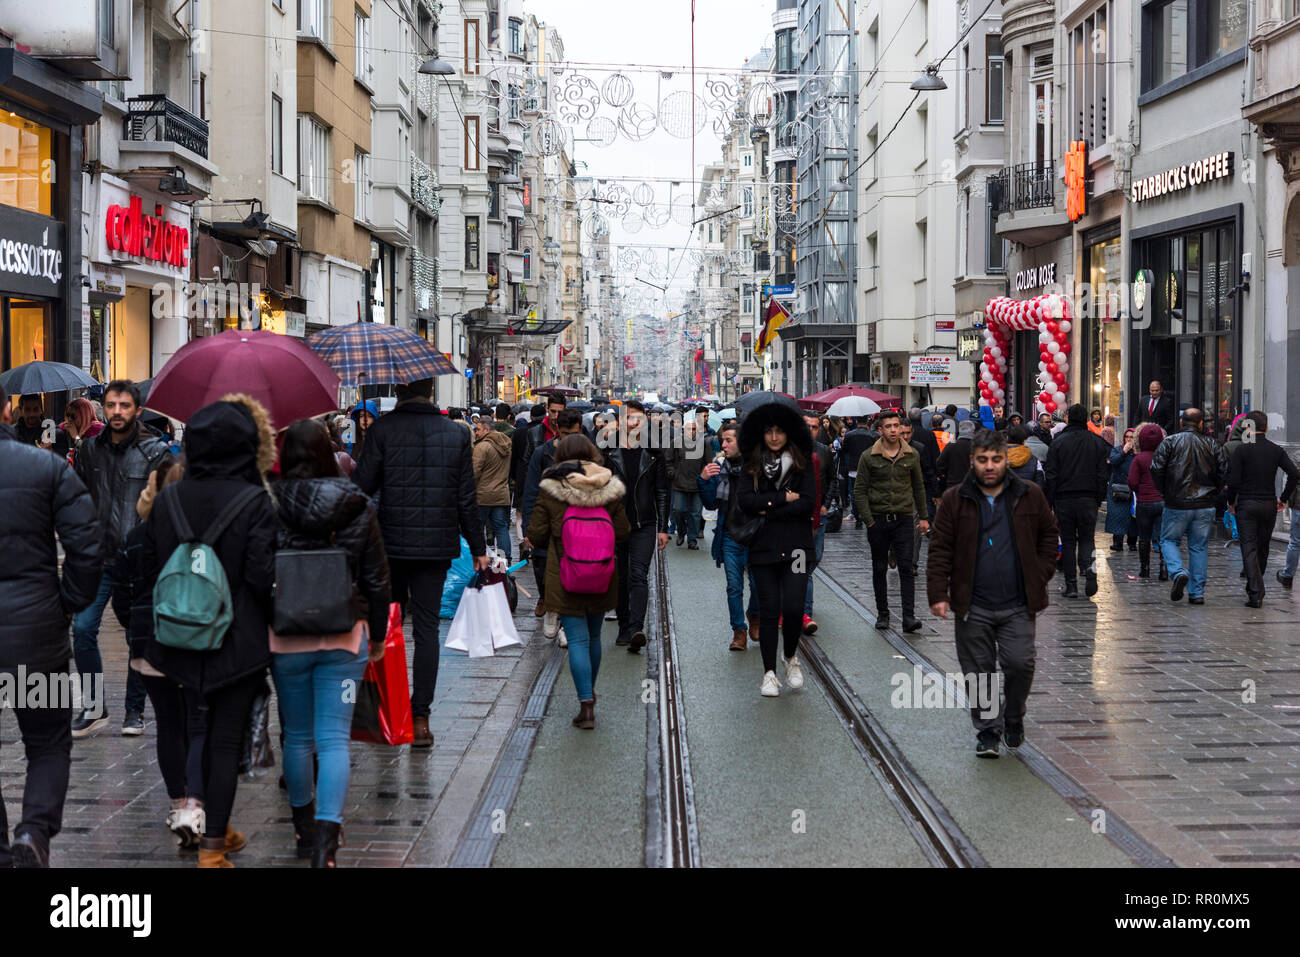 People crowden at Istiklal street in Istanbul, Turkey. Dec 29, 2018 Stock Photo